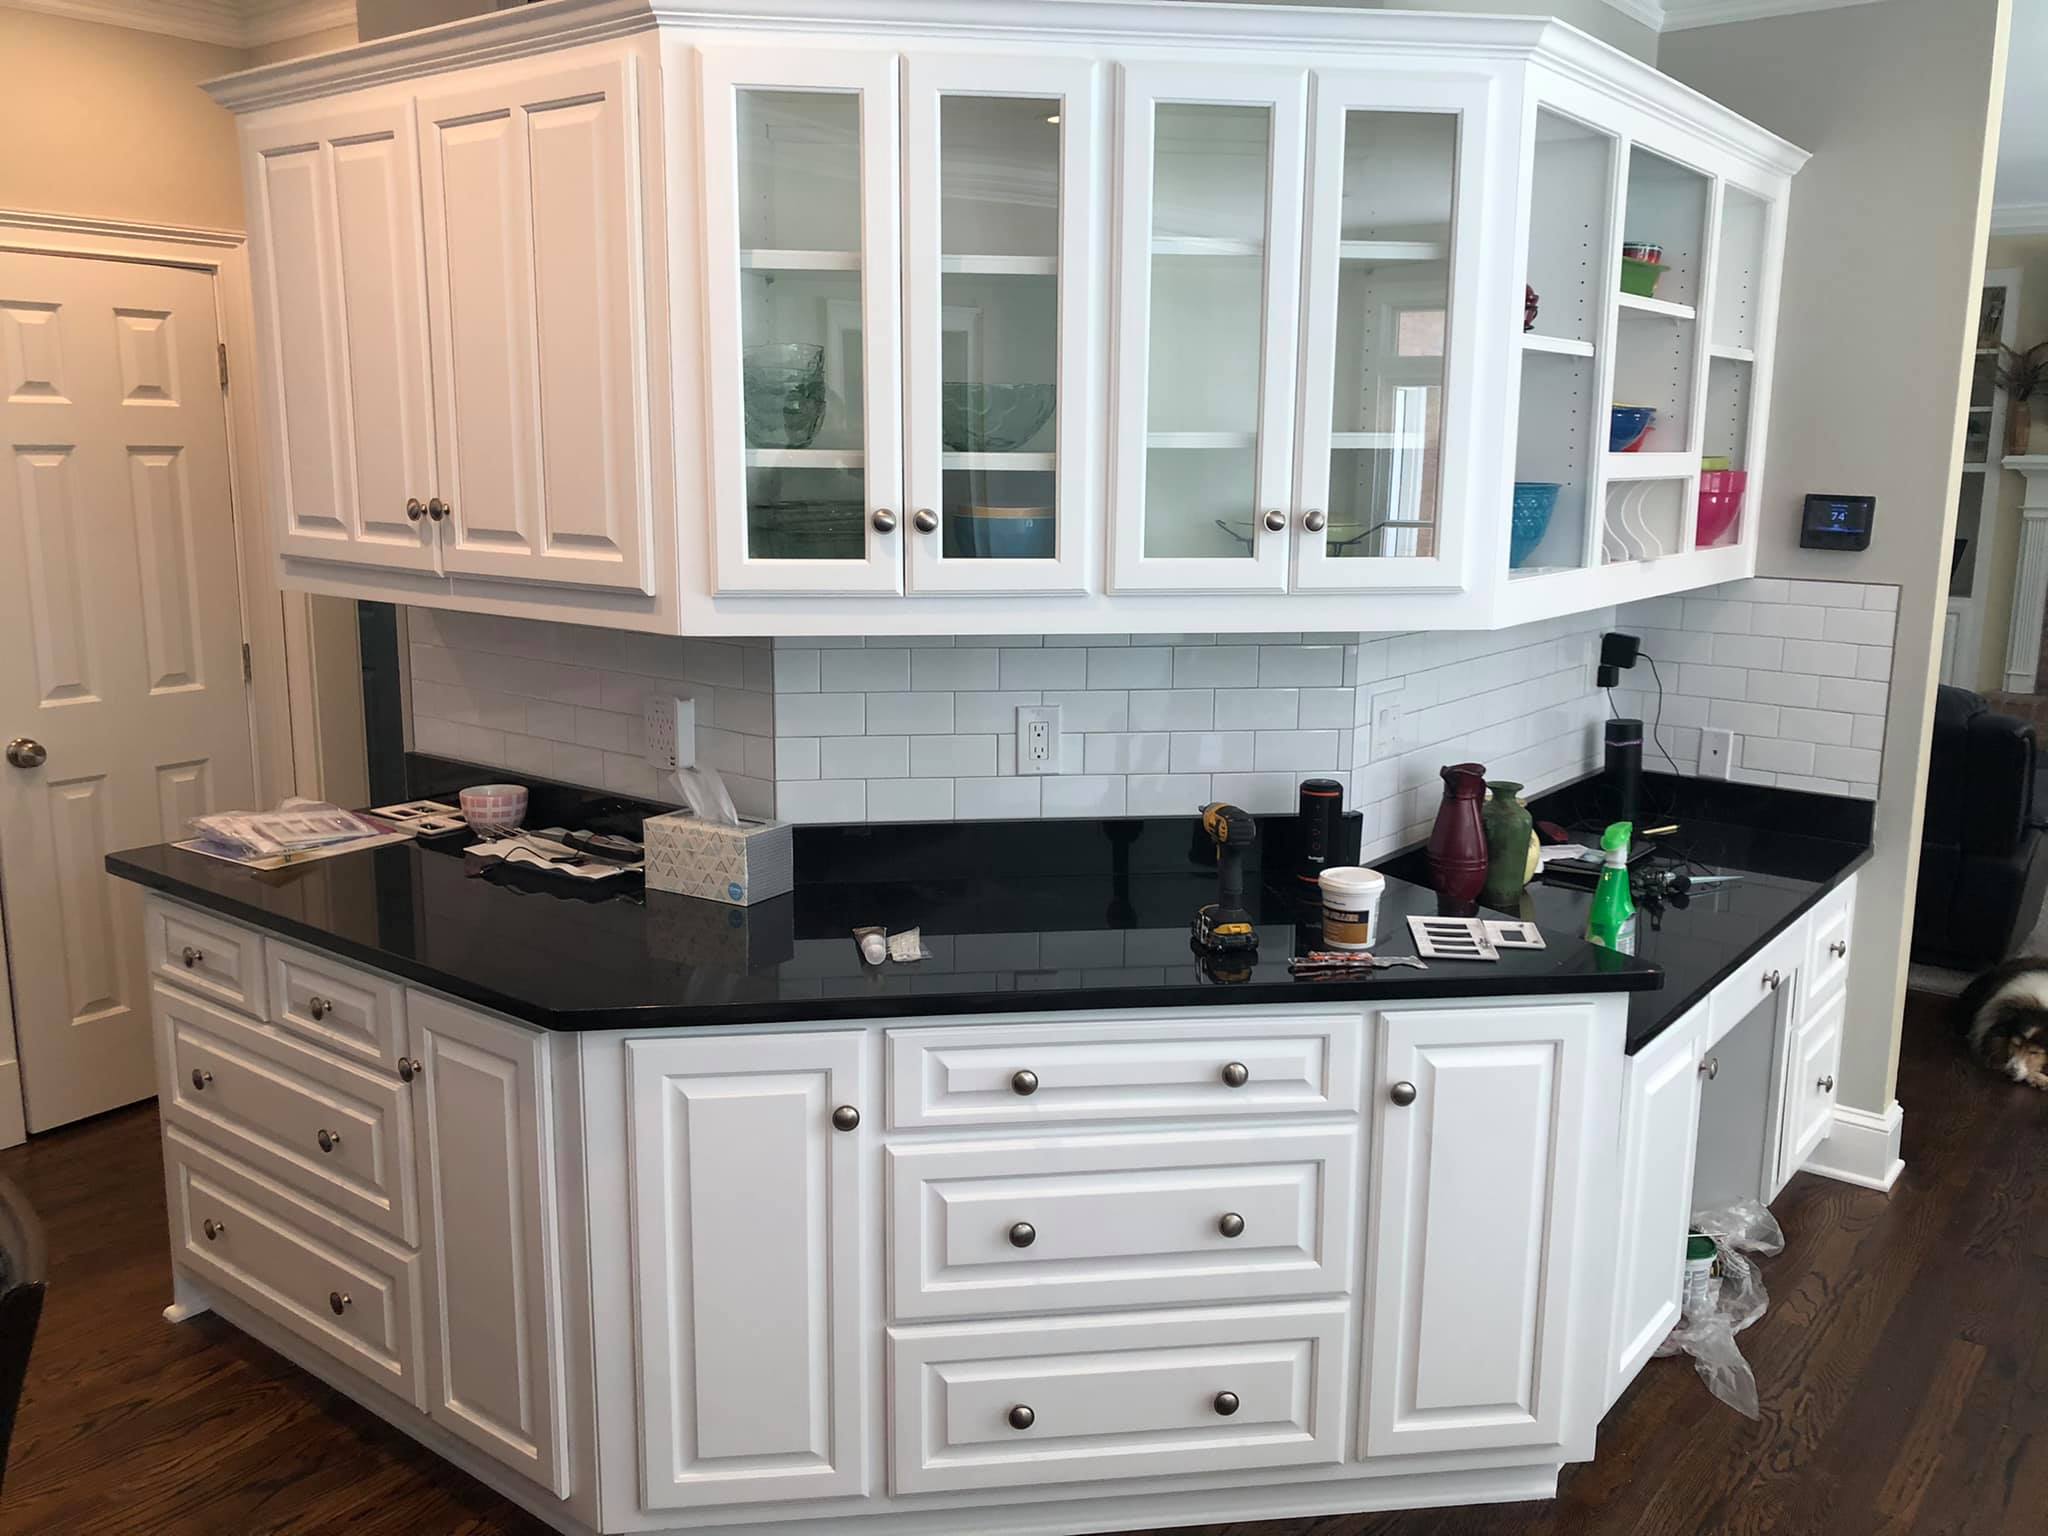 Full Kitchen Cabinets Resurfacing Painting  Refinishing Near Peachtree City 1 ?is Pending Load=1